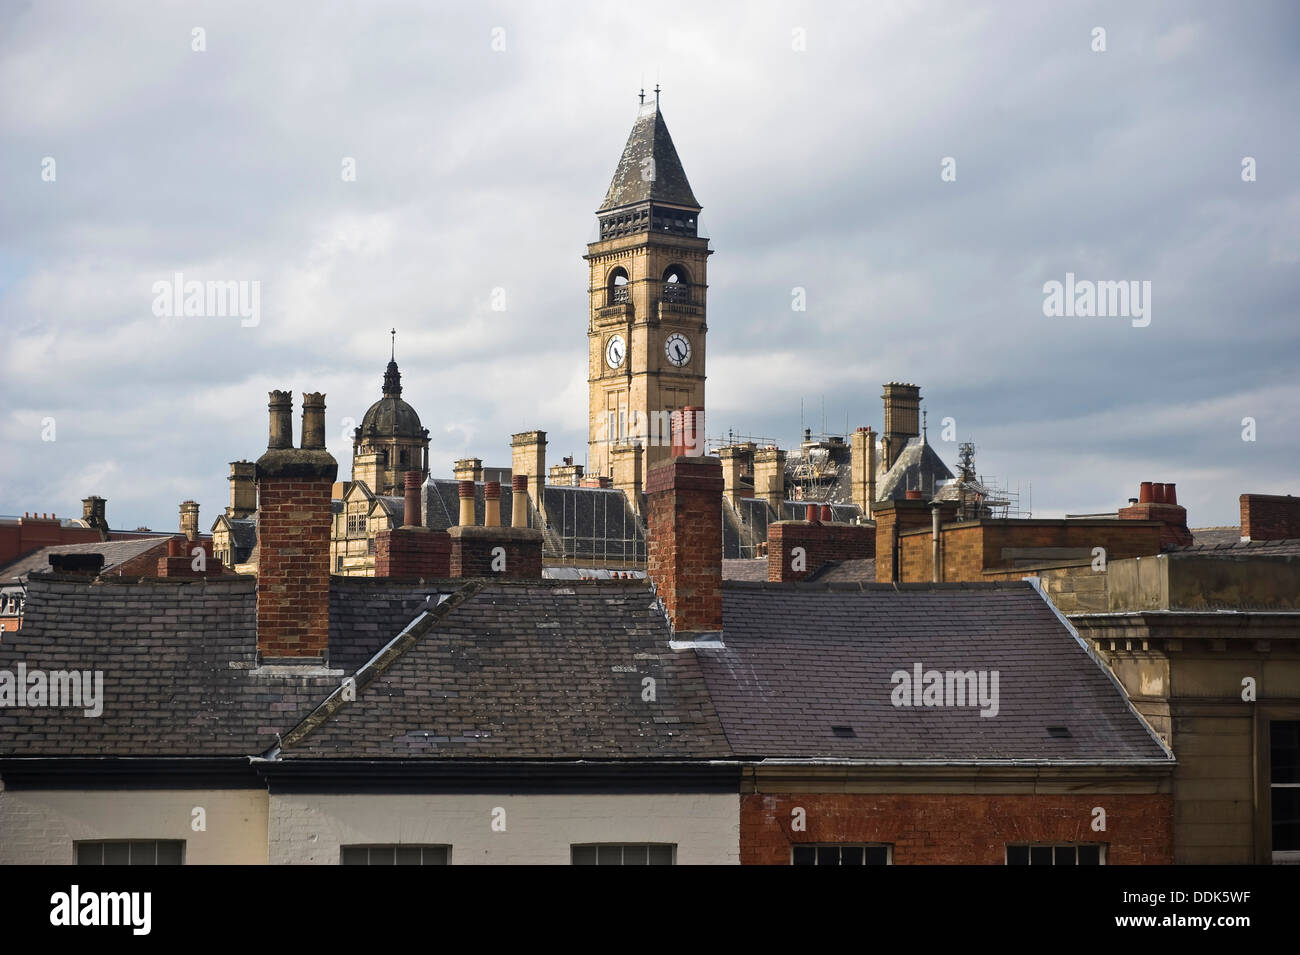 Wakefield Town Hall clock tower, South Yorkshire, UK Stock Photo